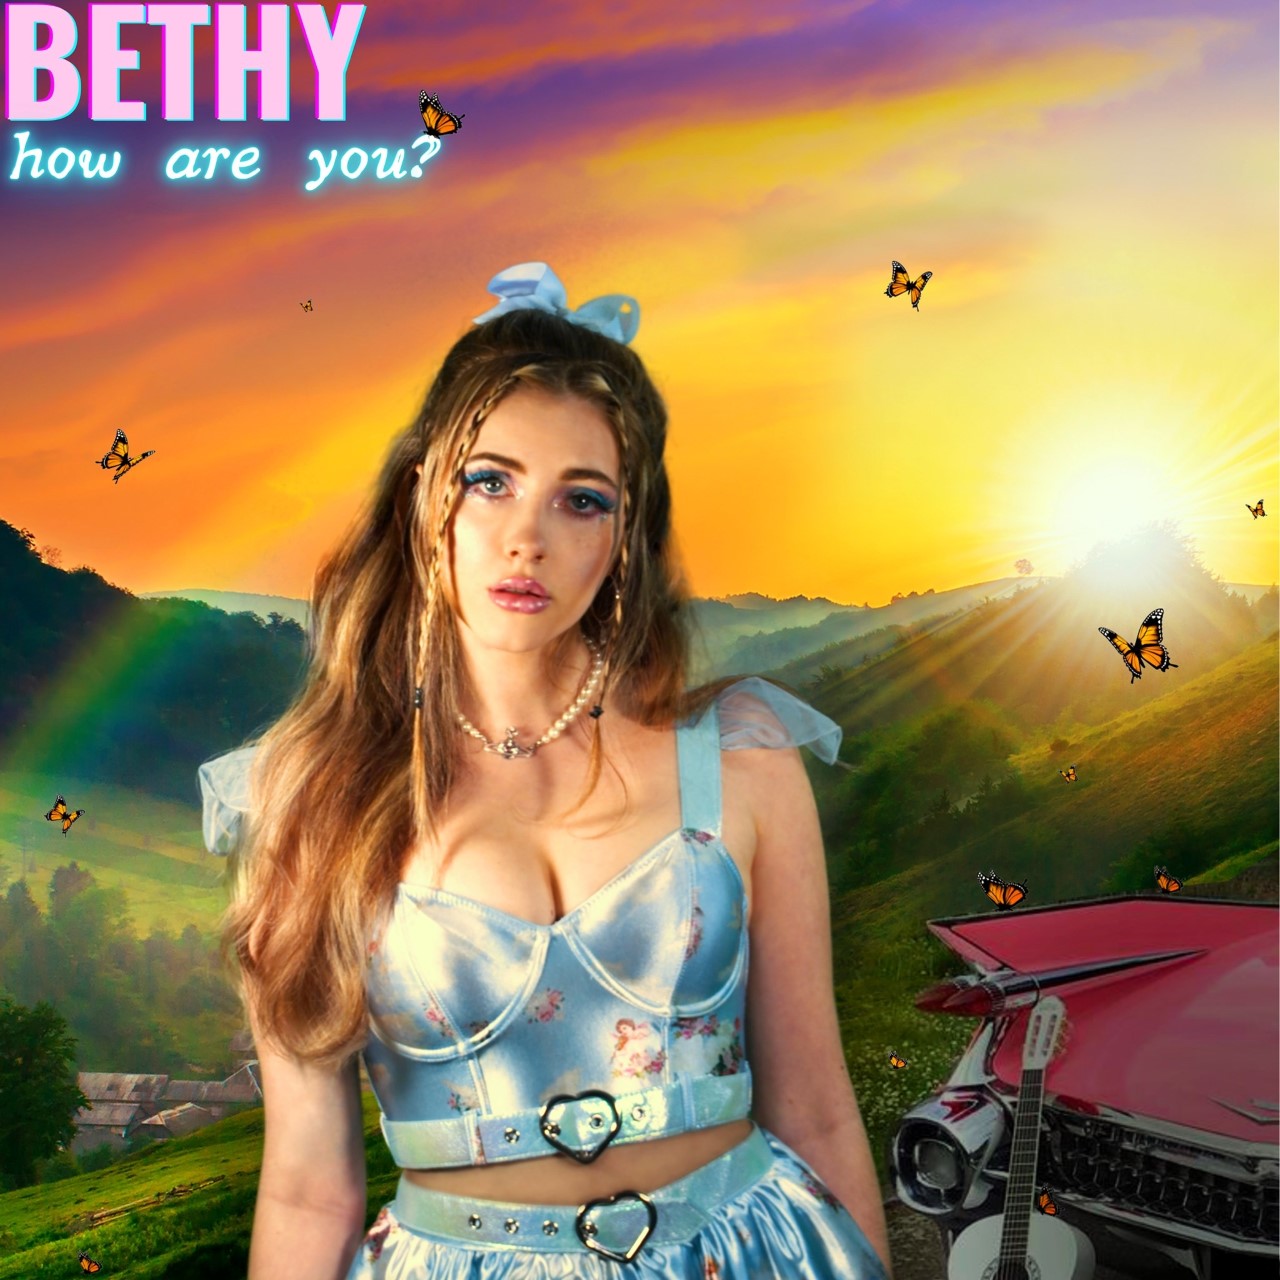 BETHY – How are you?